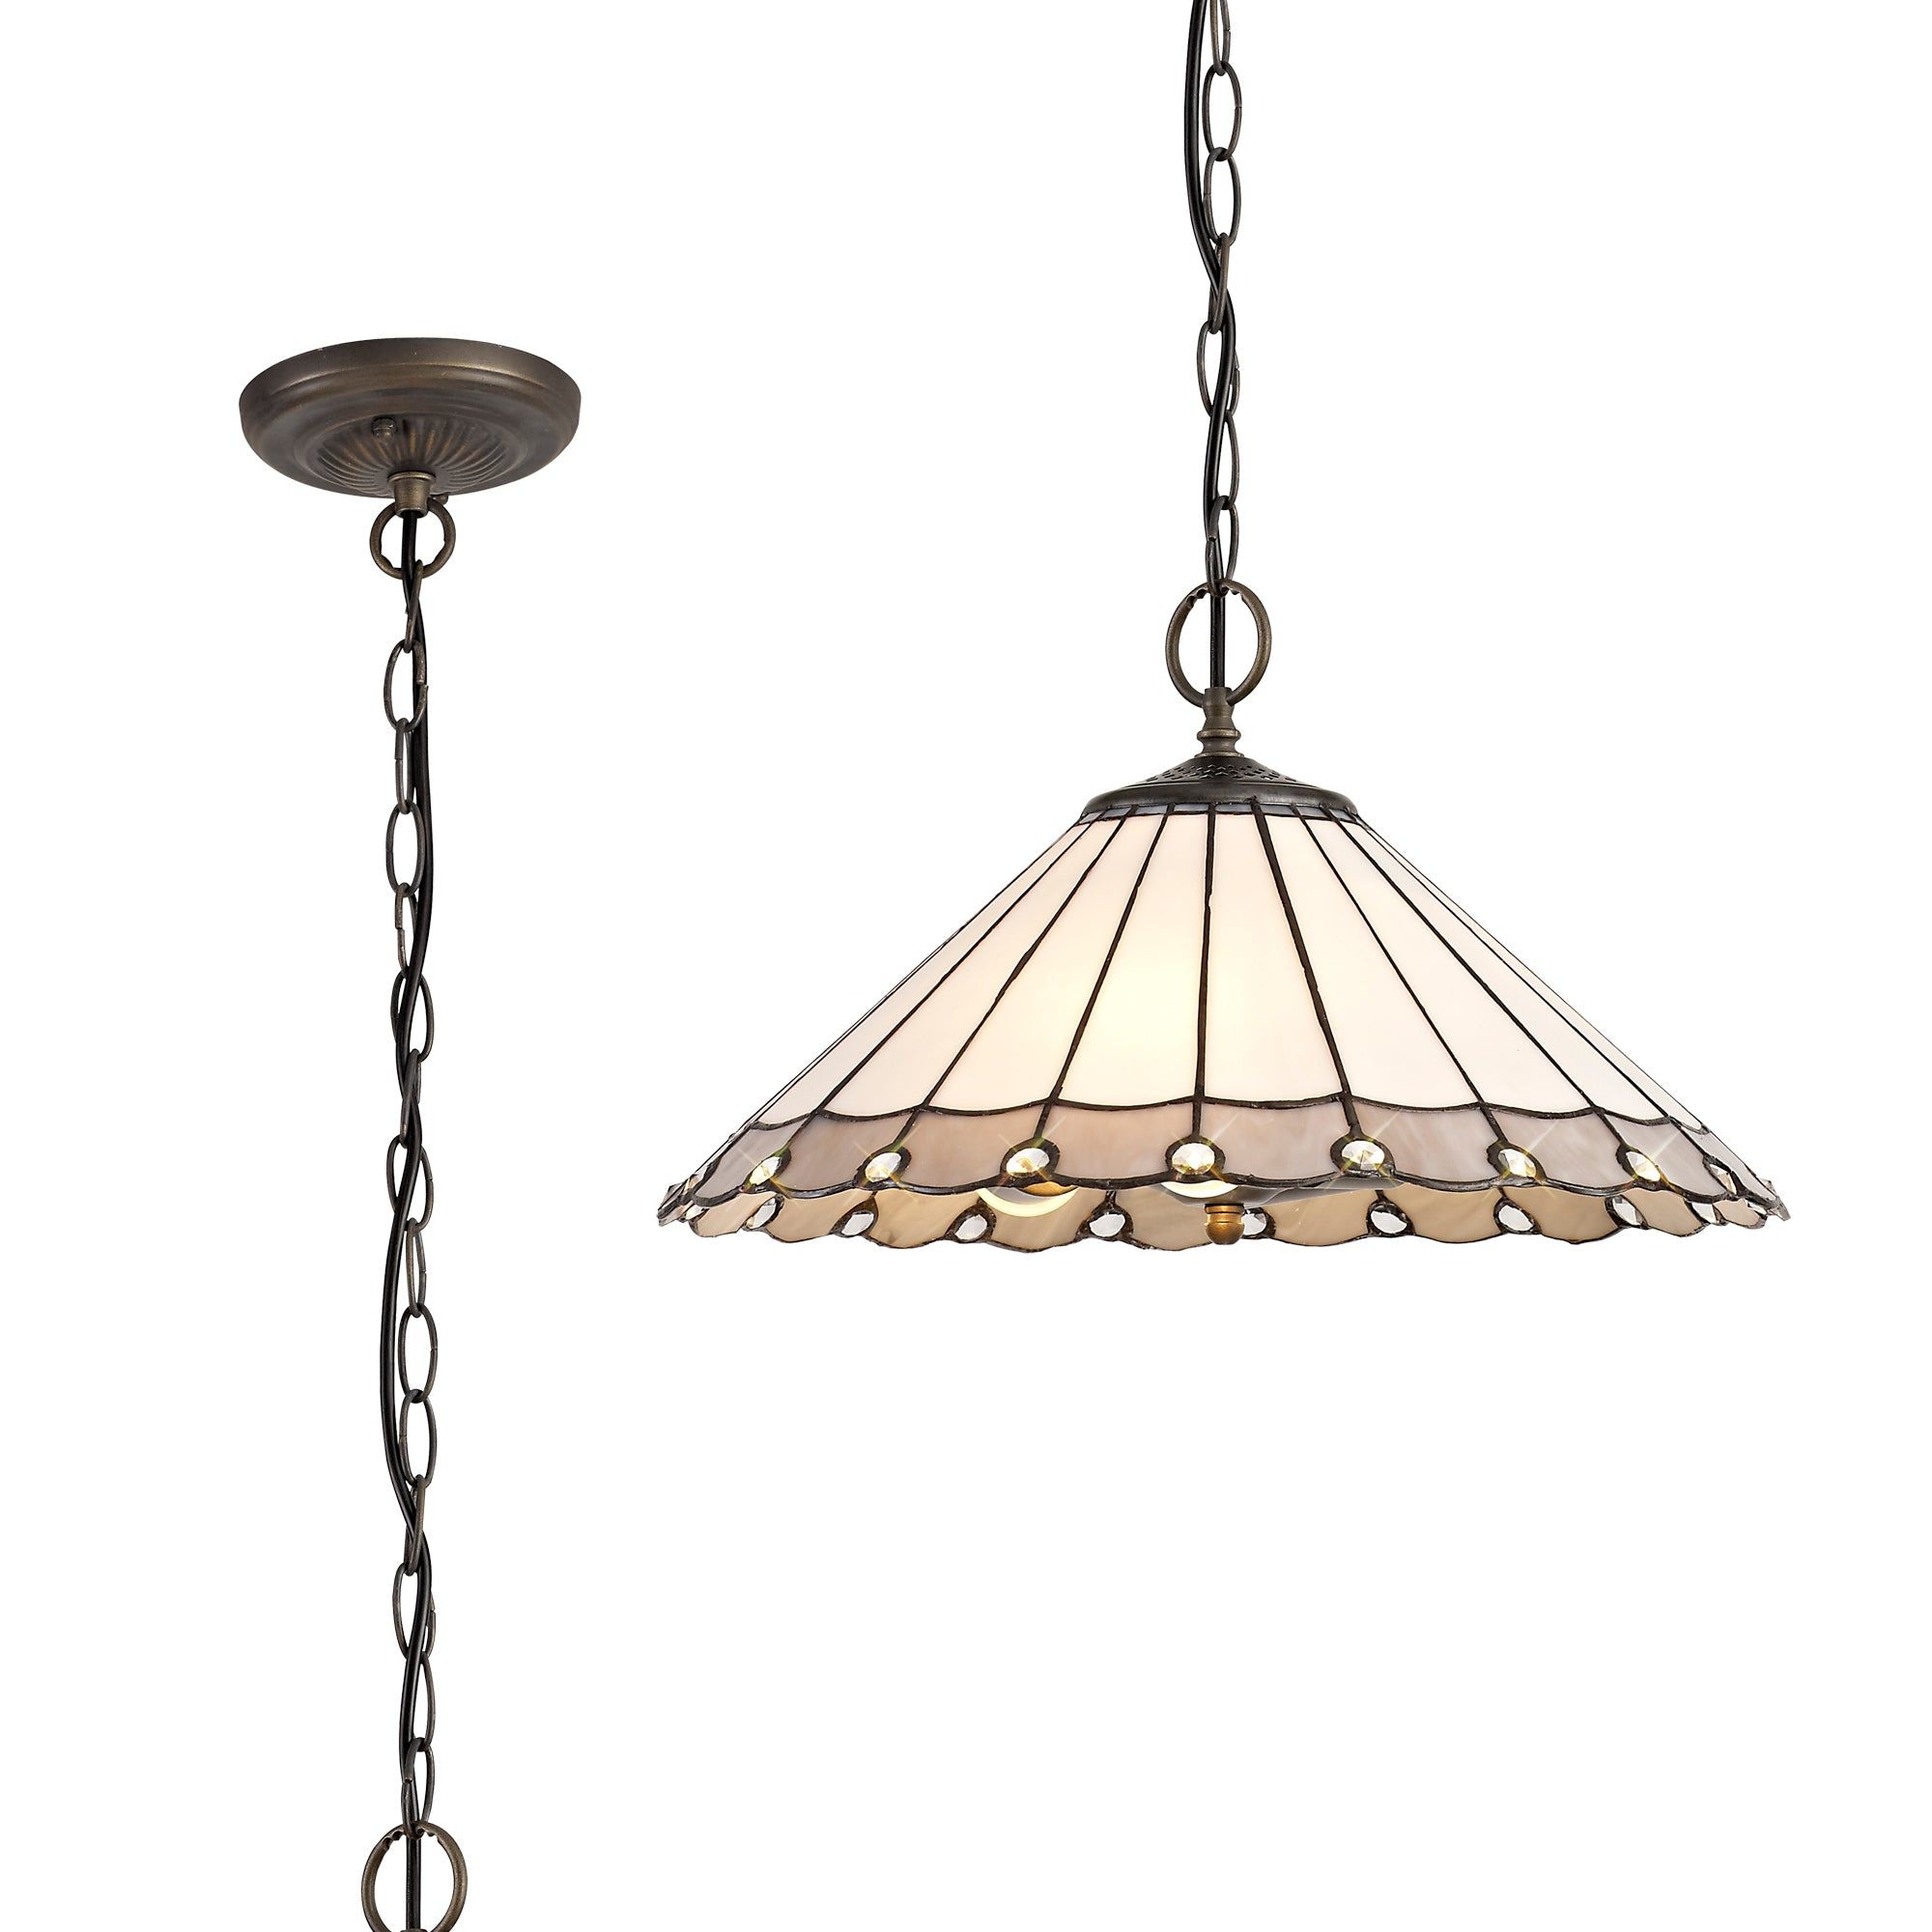 Sheitsr 3 Light Downlighter Pendant E27 With 30/40cm Tiffany Shade